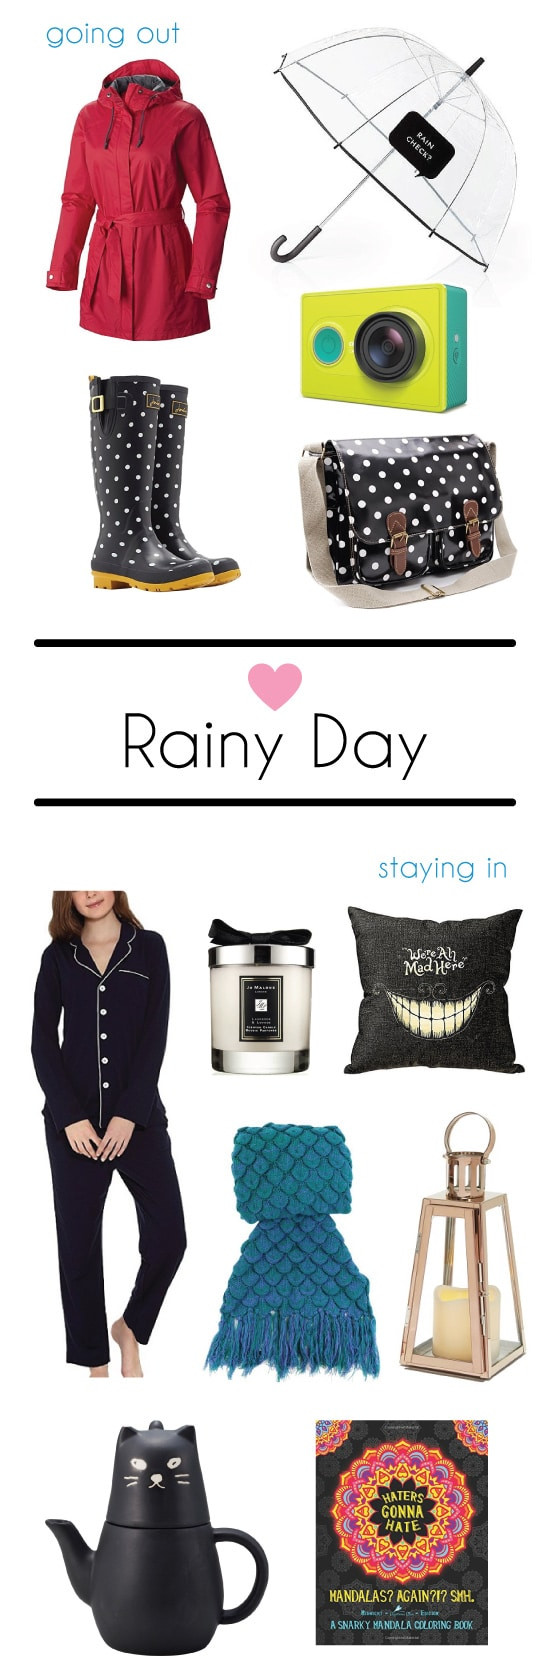 Rainy Day Bachelorette Party Ideas
 Rainy Day Must have Outfits and Accessories Vivid s